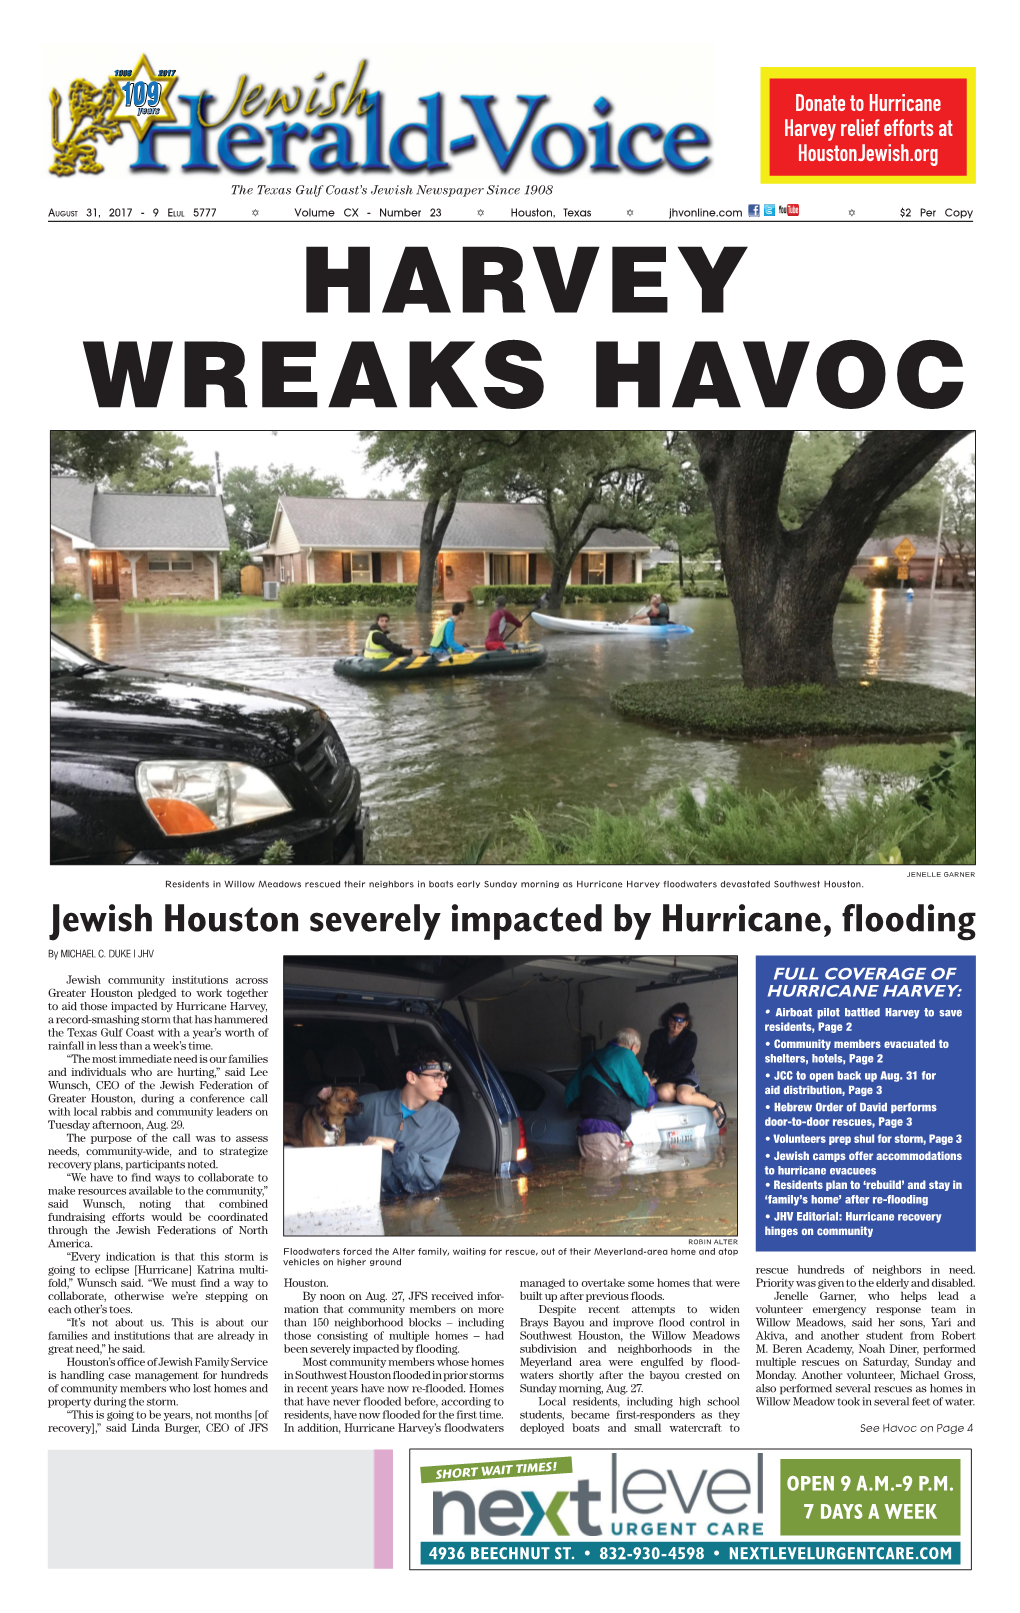 Jewish Houston Severely Impacted by Hurricane, Flooding by MICHAEL C